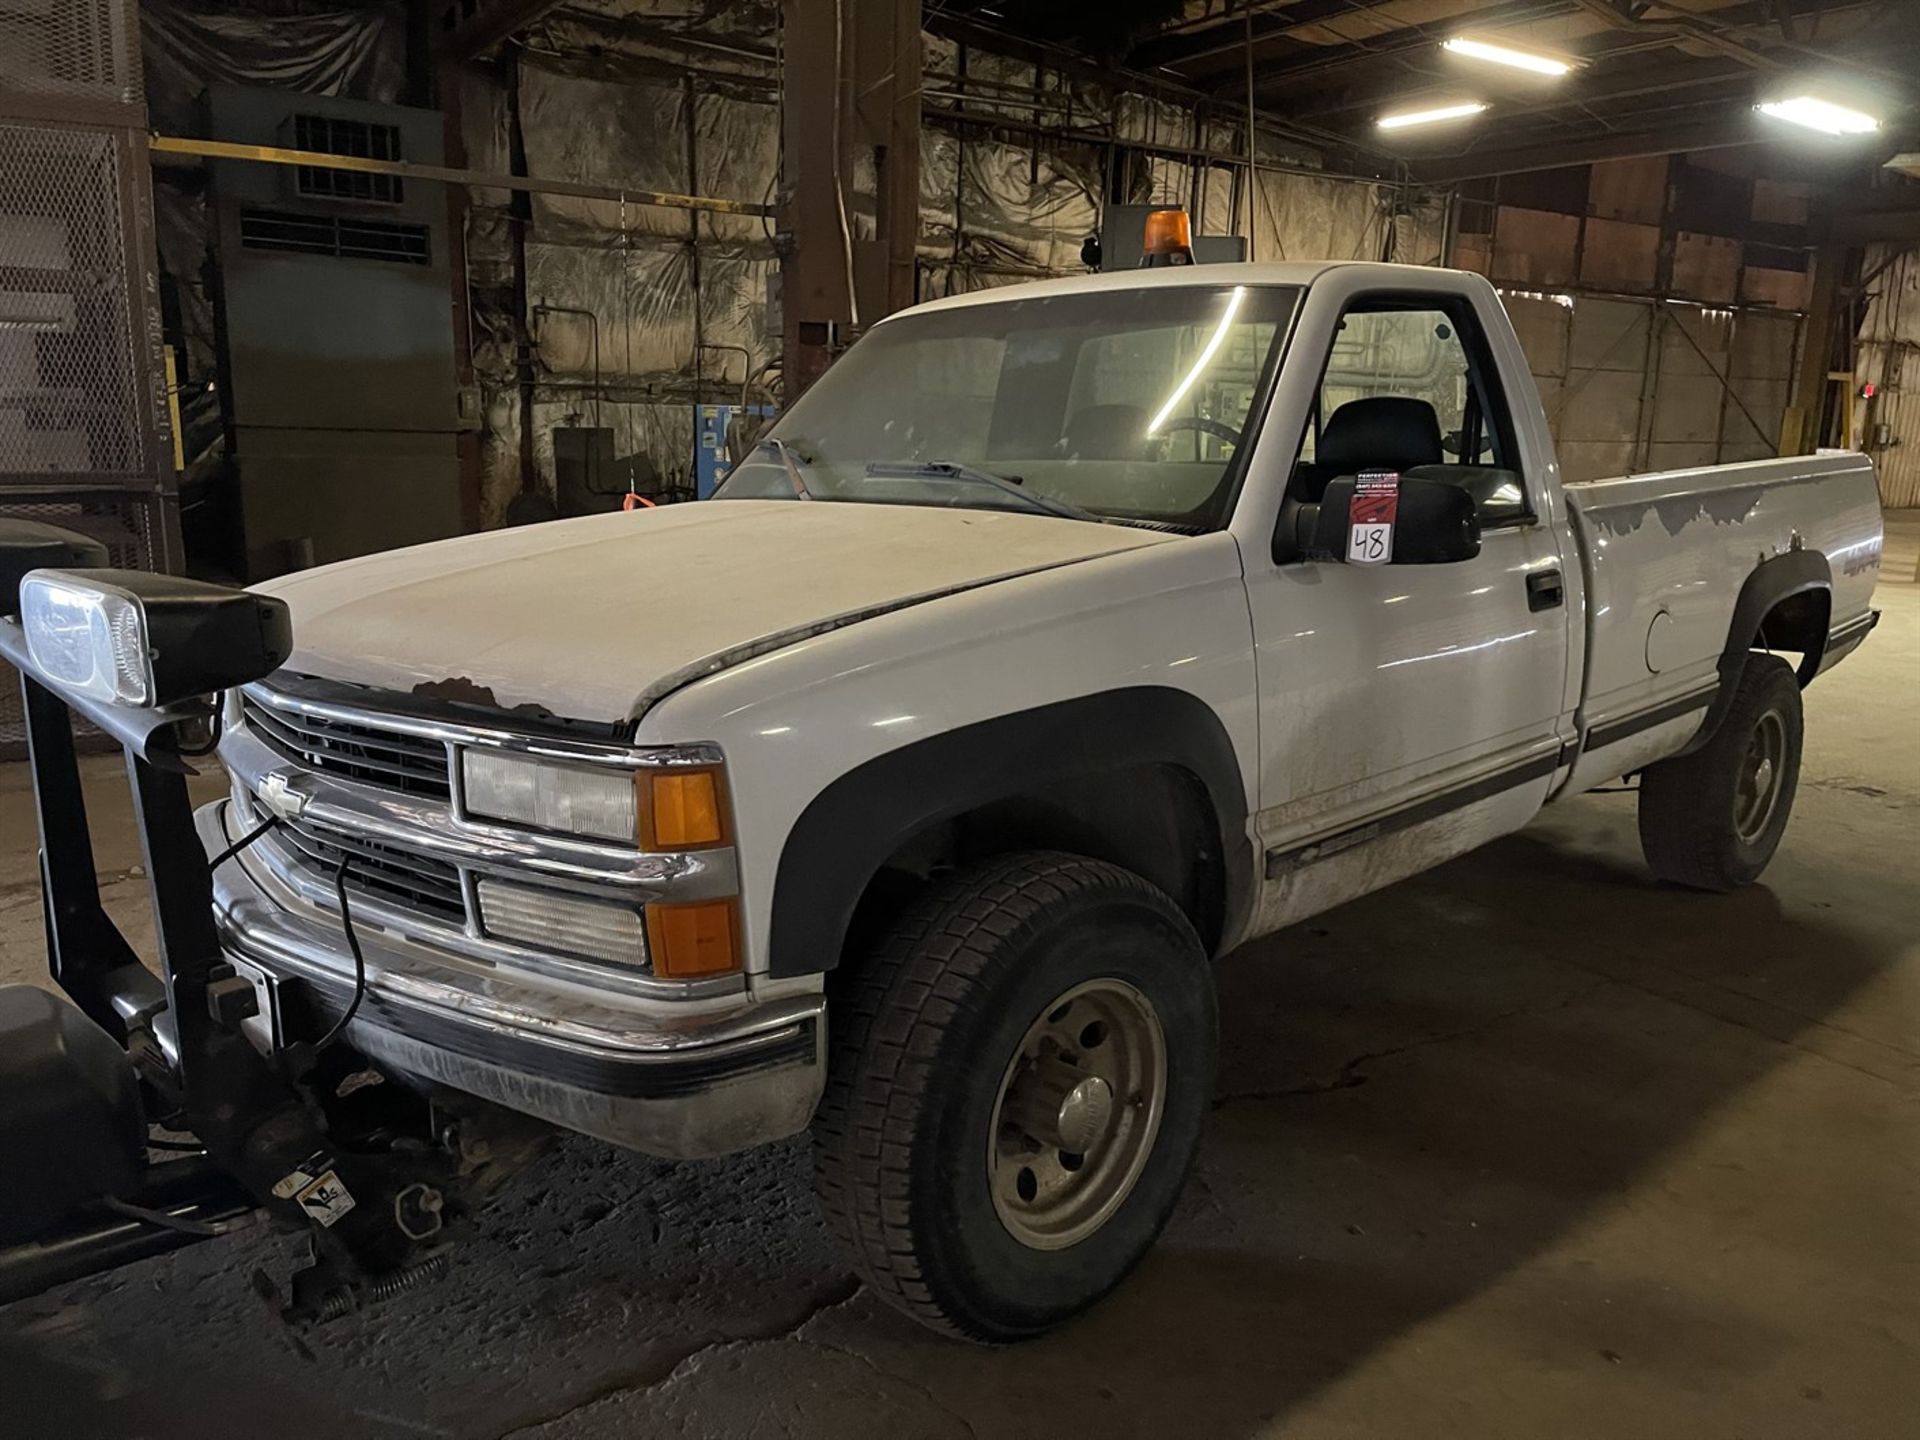 Chevy 2500 Pickup Truck, 4x4, Automatic, 183,638 Miles, Blizzard Plow, Needs Battery, Needs Fuel - Image 2 of 12